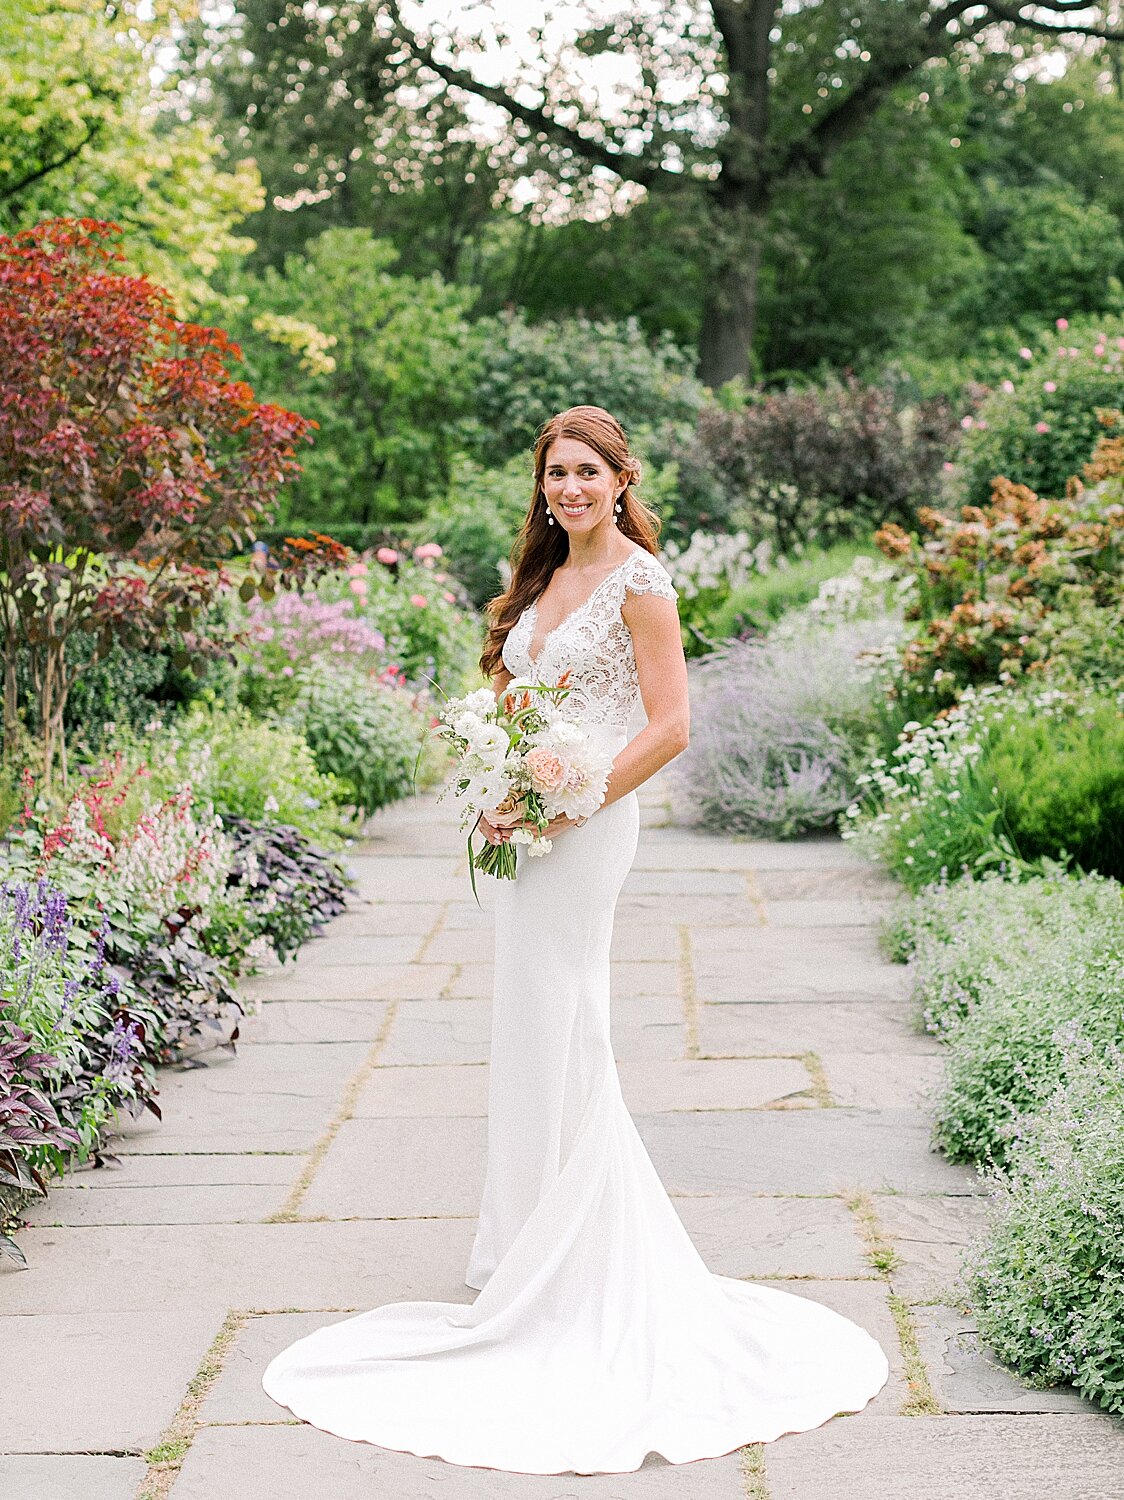 New York City gardens bridal portrait | Asher Gardner Photography | Elopement at the Central Park Conservatory Gardens